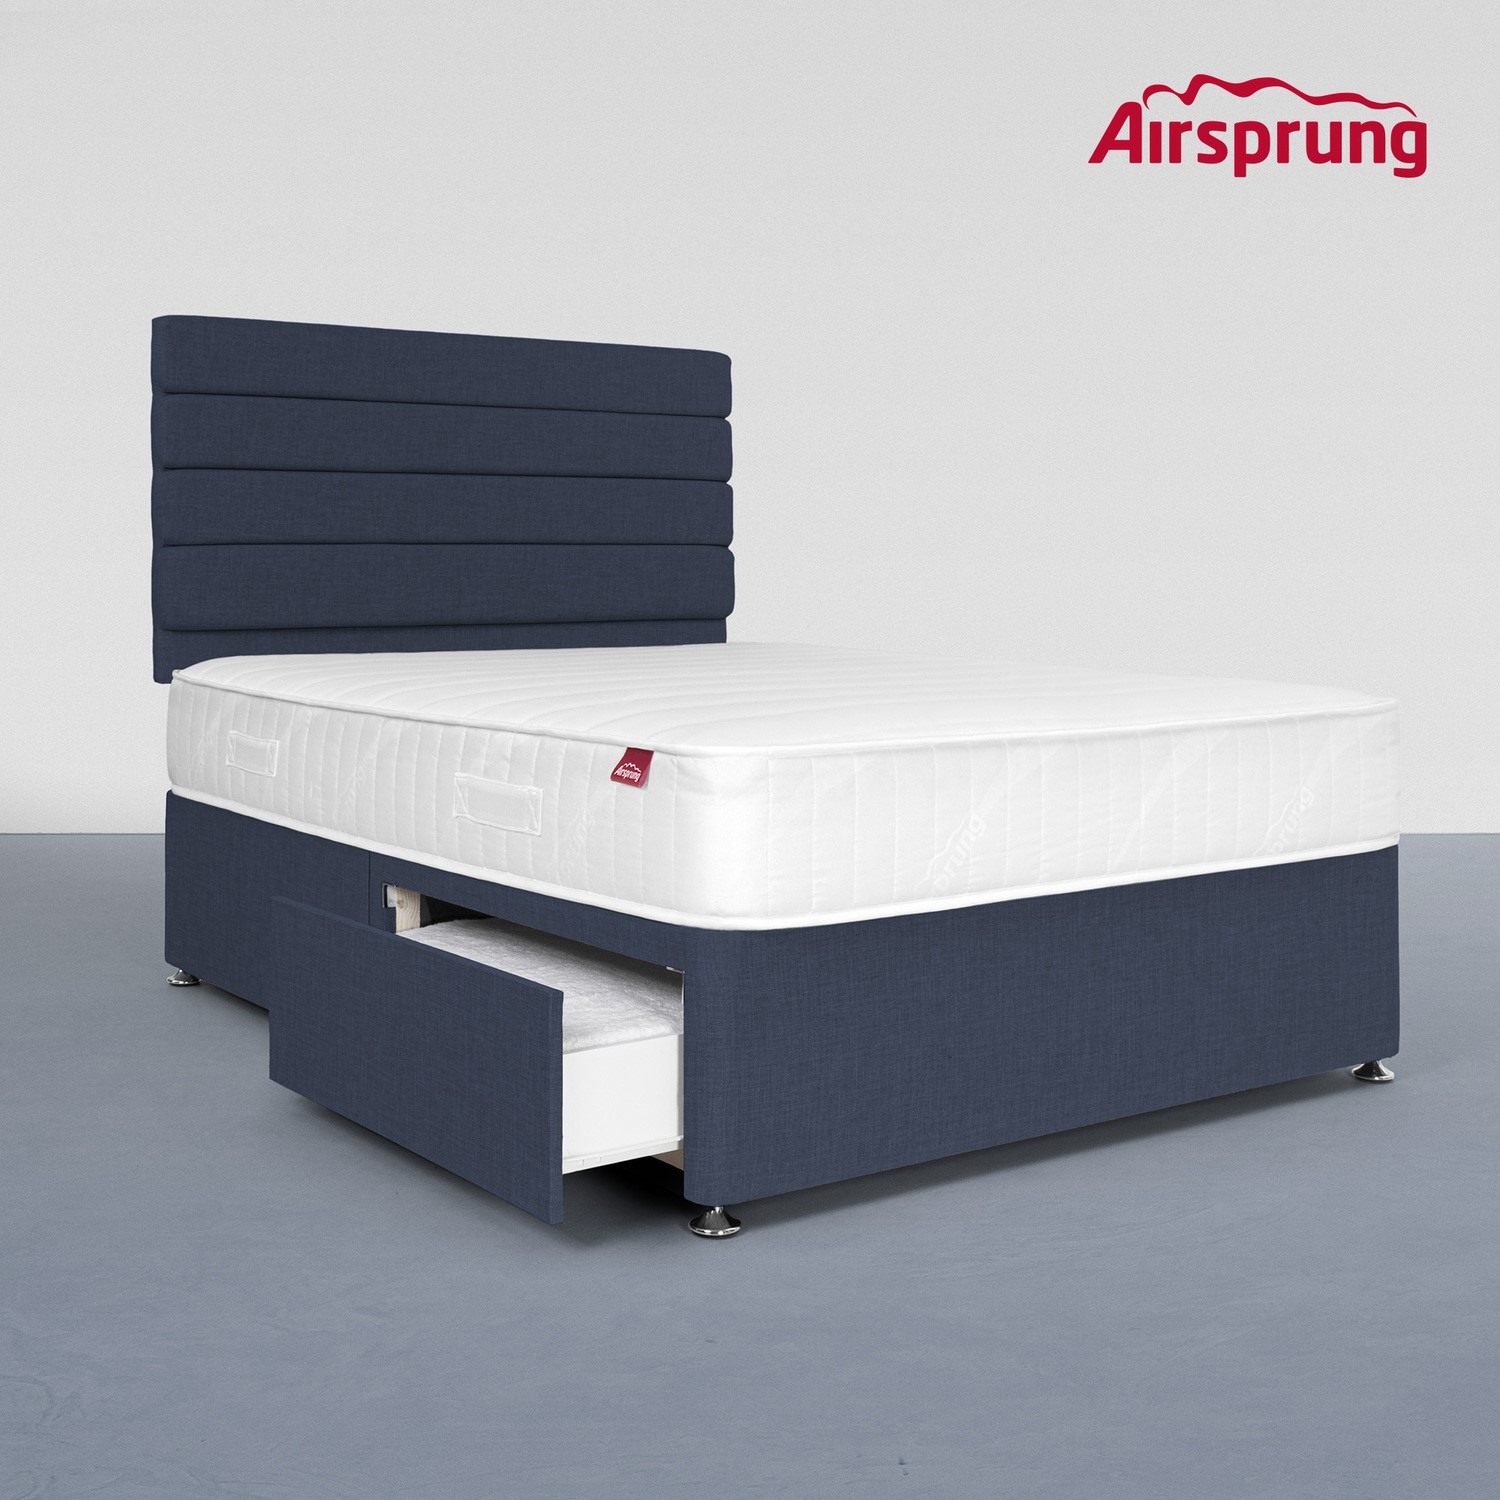 Read more about Airsprung king size 2 drawer divan bed with hybrid mattress midnight blue